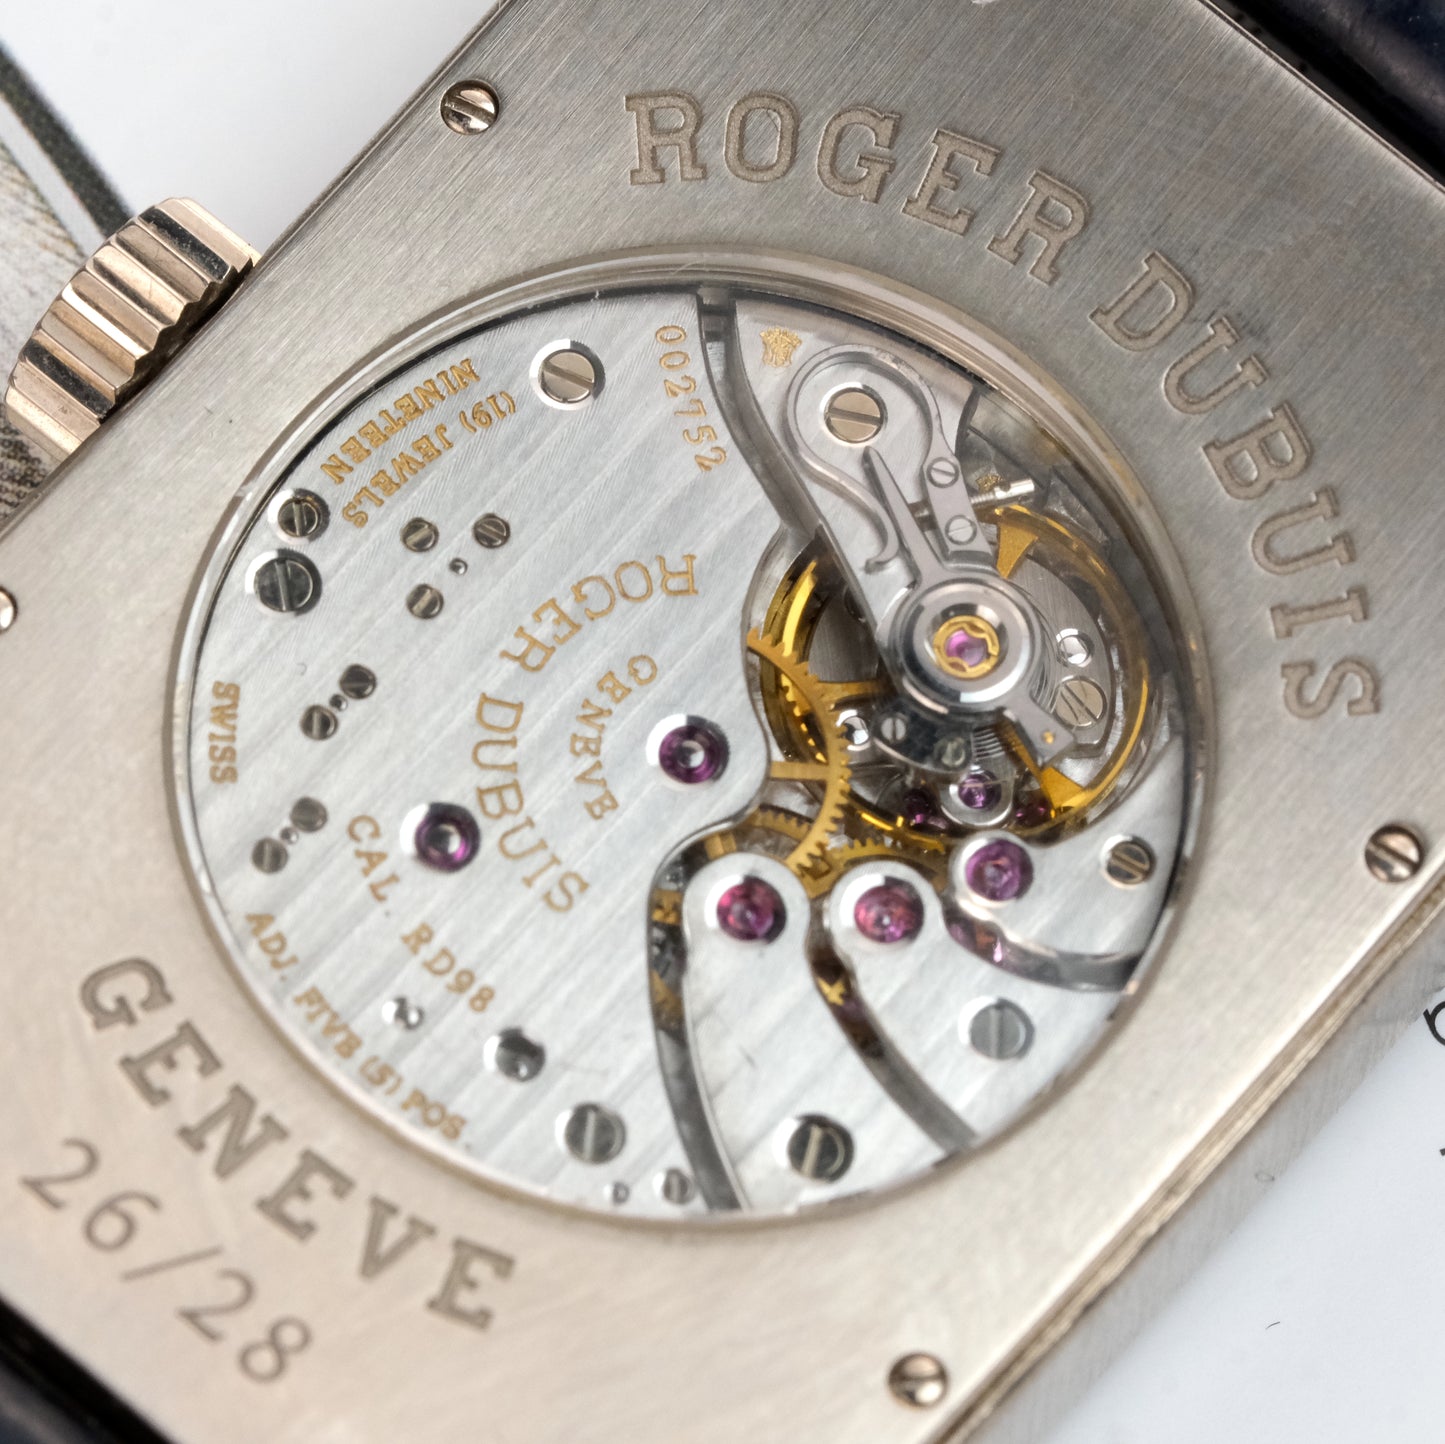 Circa 2003 White Gold Roger Dubuis Much More M32